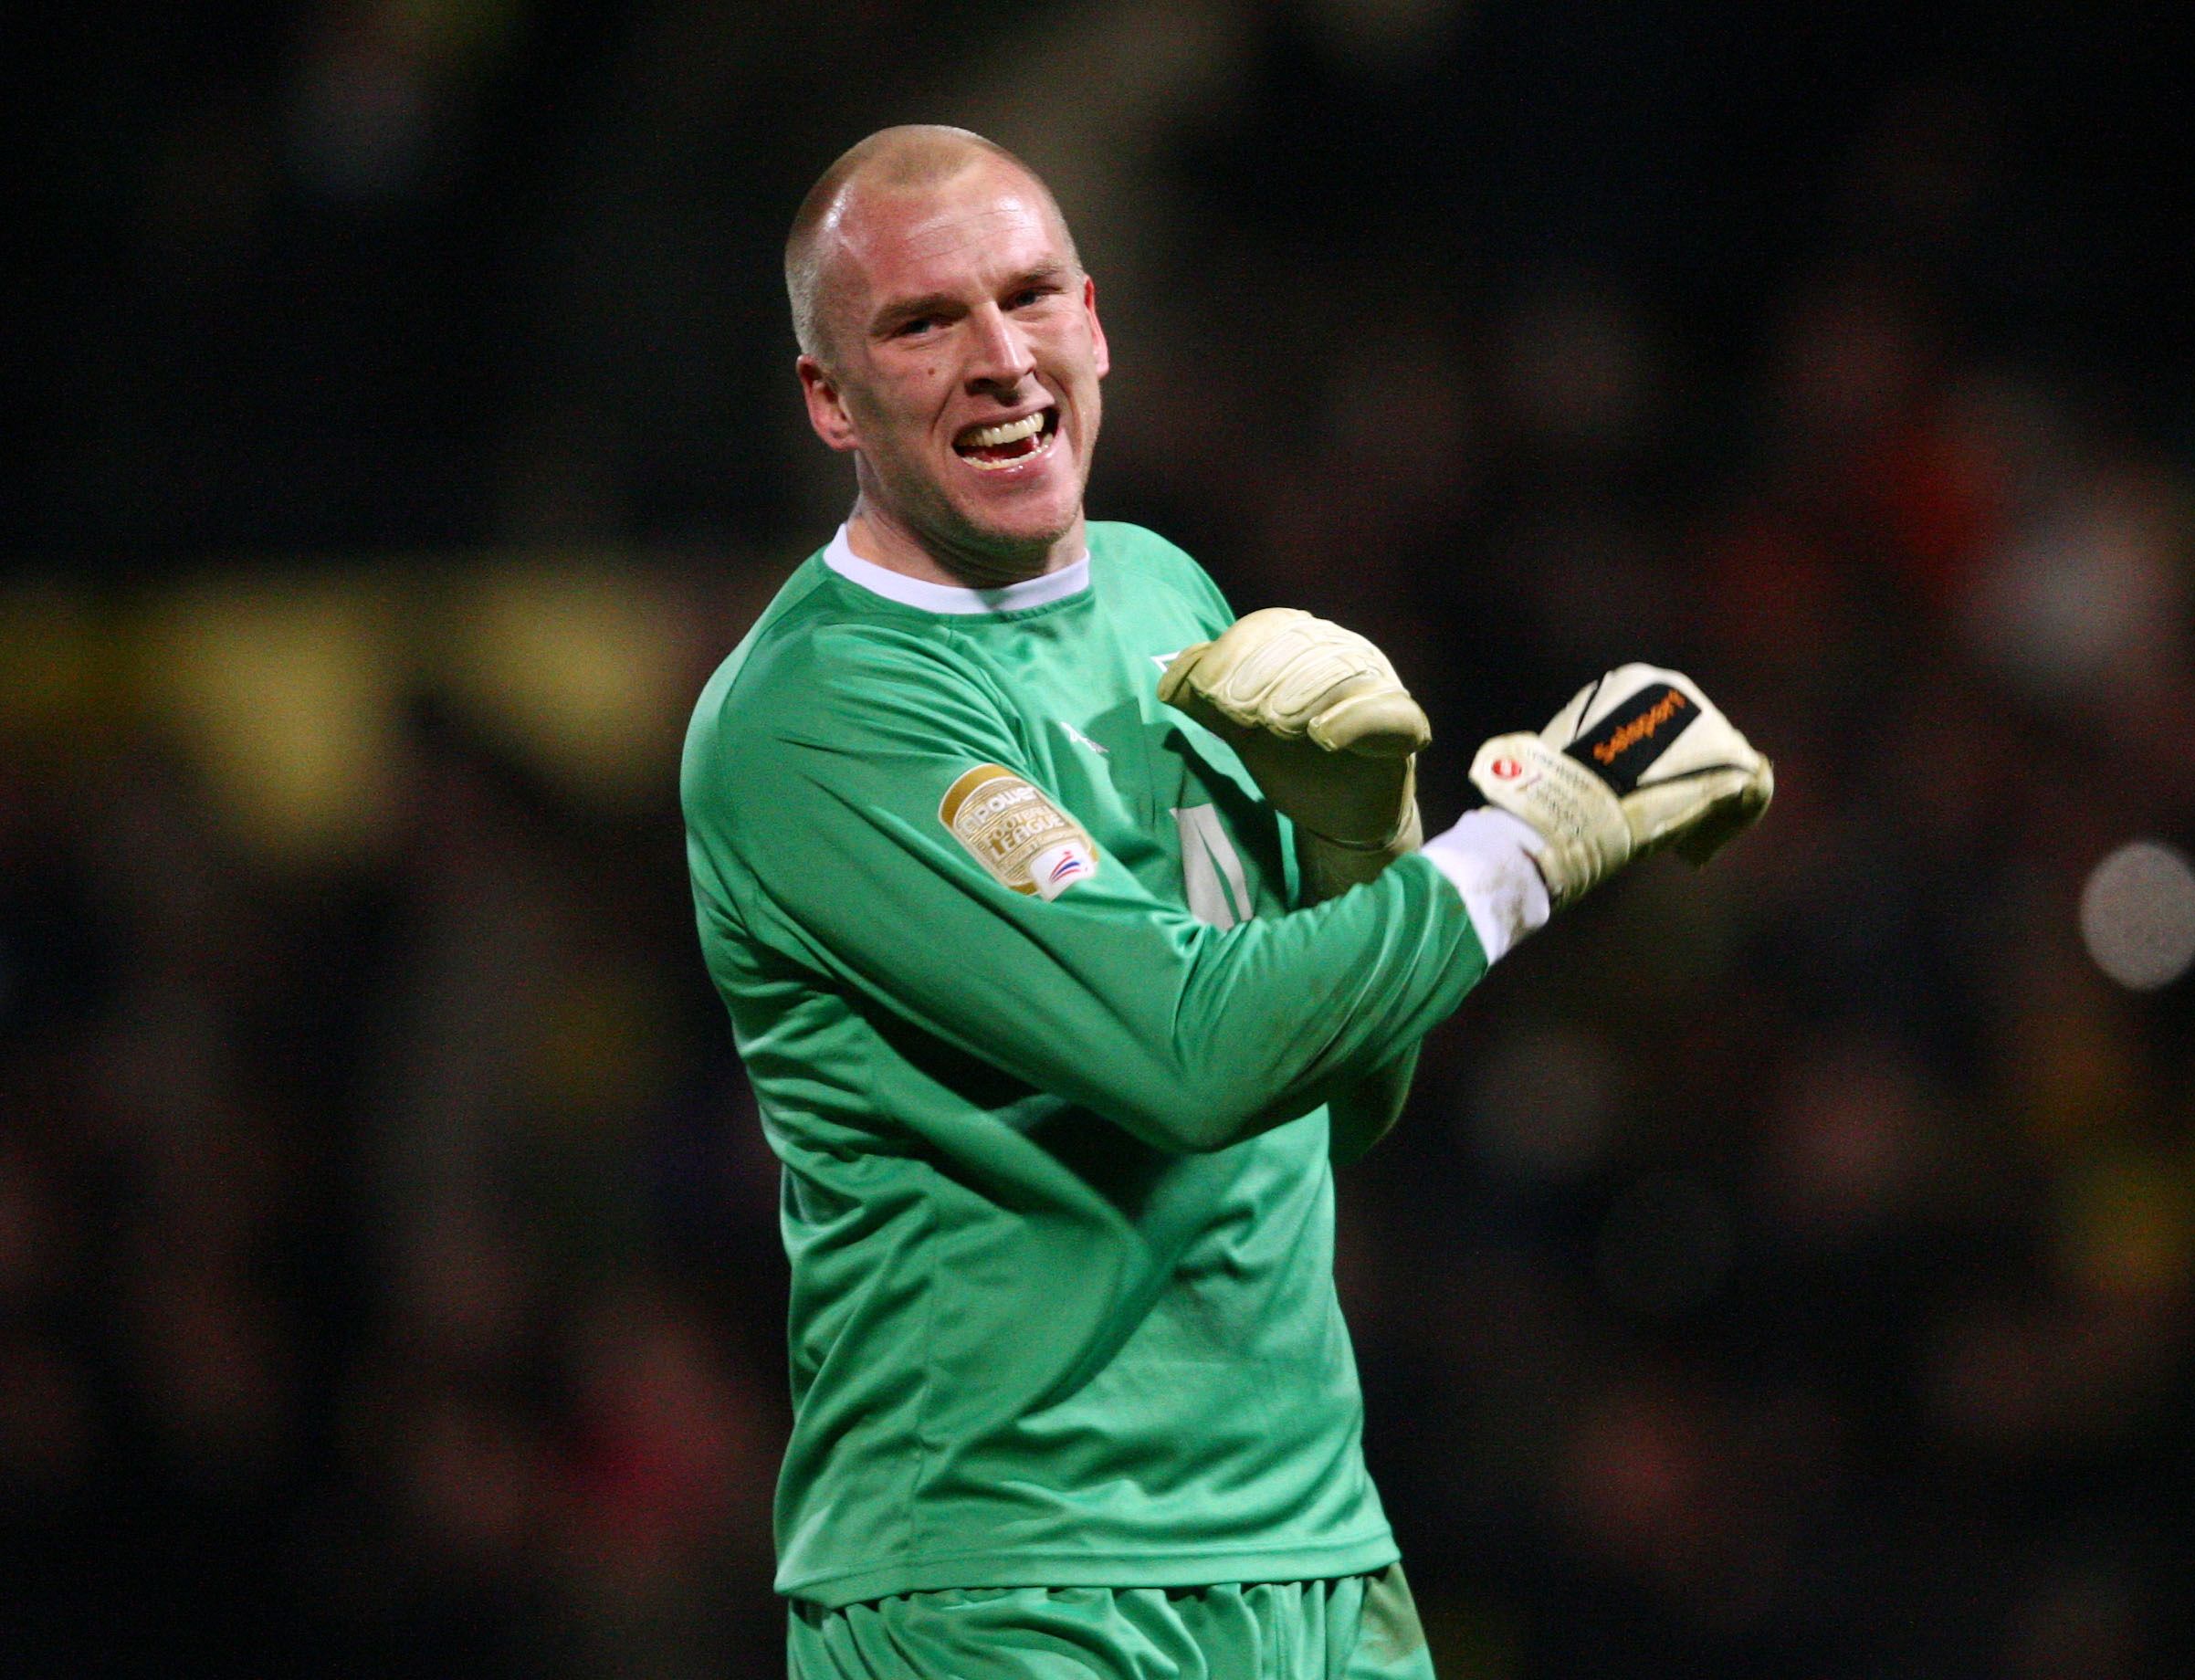 Football - Norwich City v Bristol City npower Football League Championship - Carrow Road - 10/11 - 14/3/11 
Norwich City's John Ruddy celebrates at the end of the match 
Mandatory Credit: Action Images / Matthew Childs 
Livepic